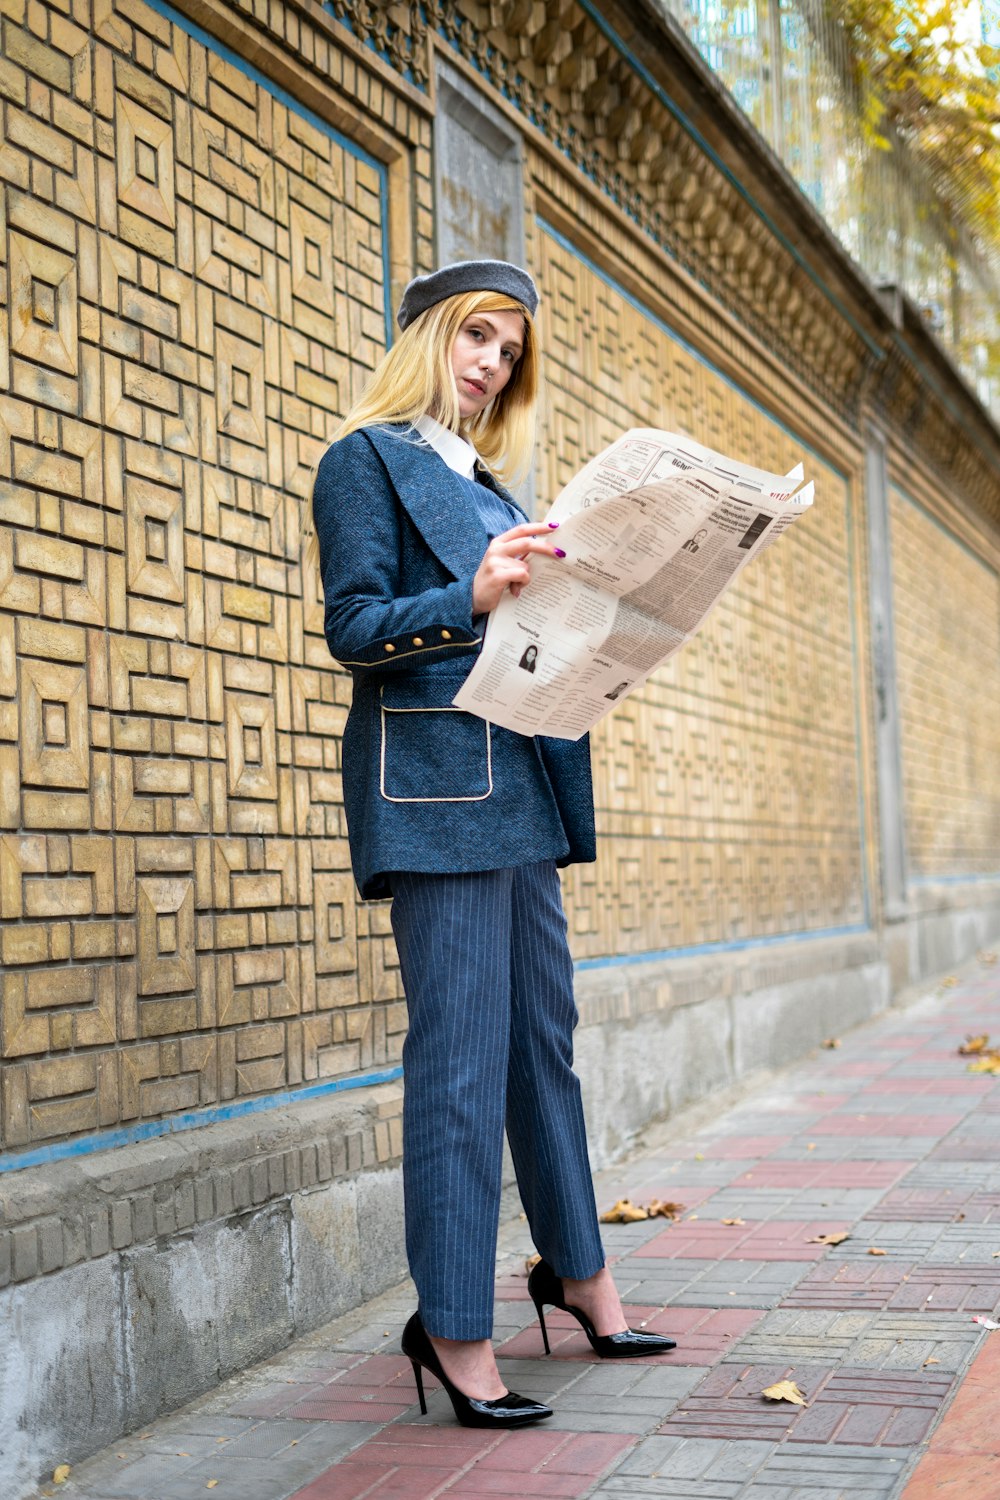 a woman in a suit and hat is reading a newspaper